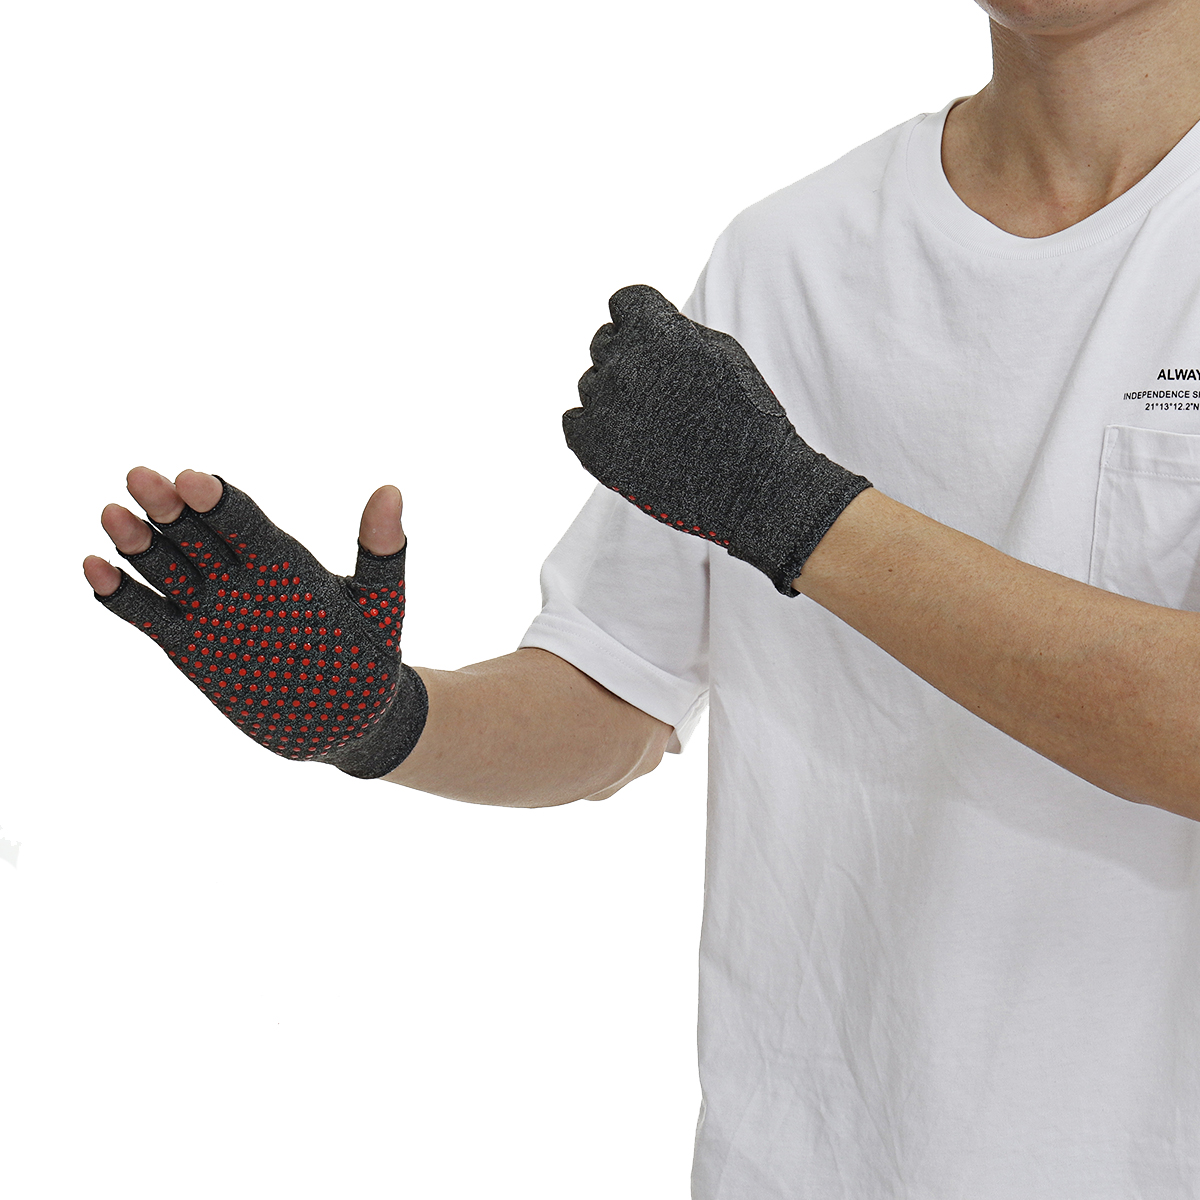 1-Pair-Compression-Arthritis-Gloves-Arthritic-Joint-Pain-Relief-Hand-Gloves-Therapy-Open-Fingers-Com-1777634-10